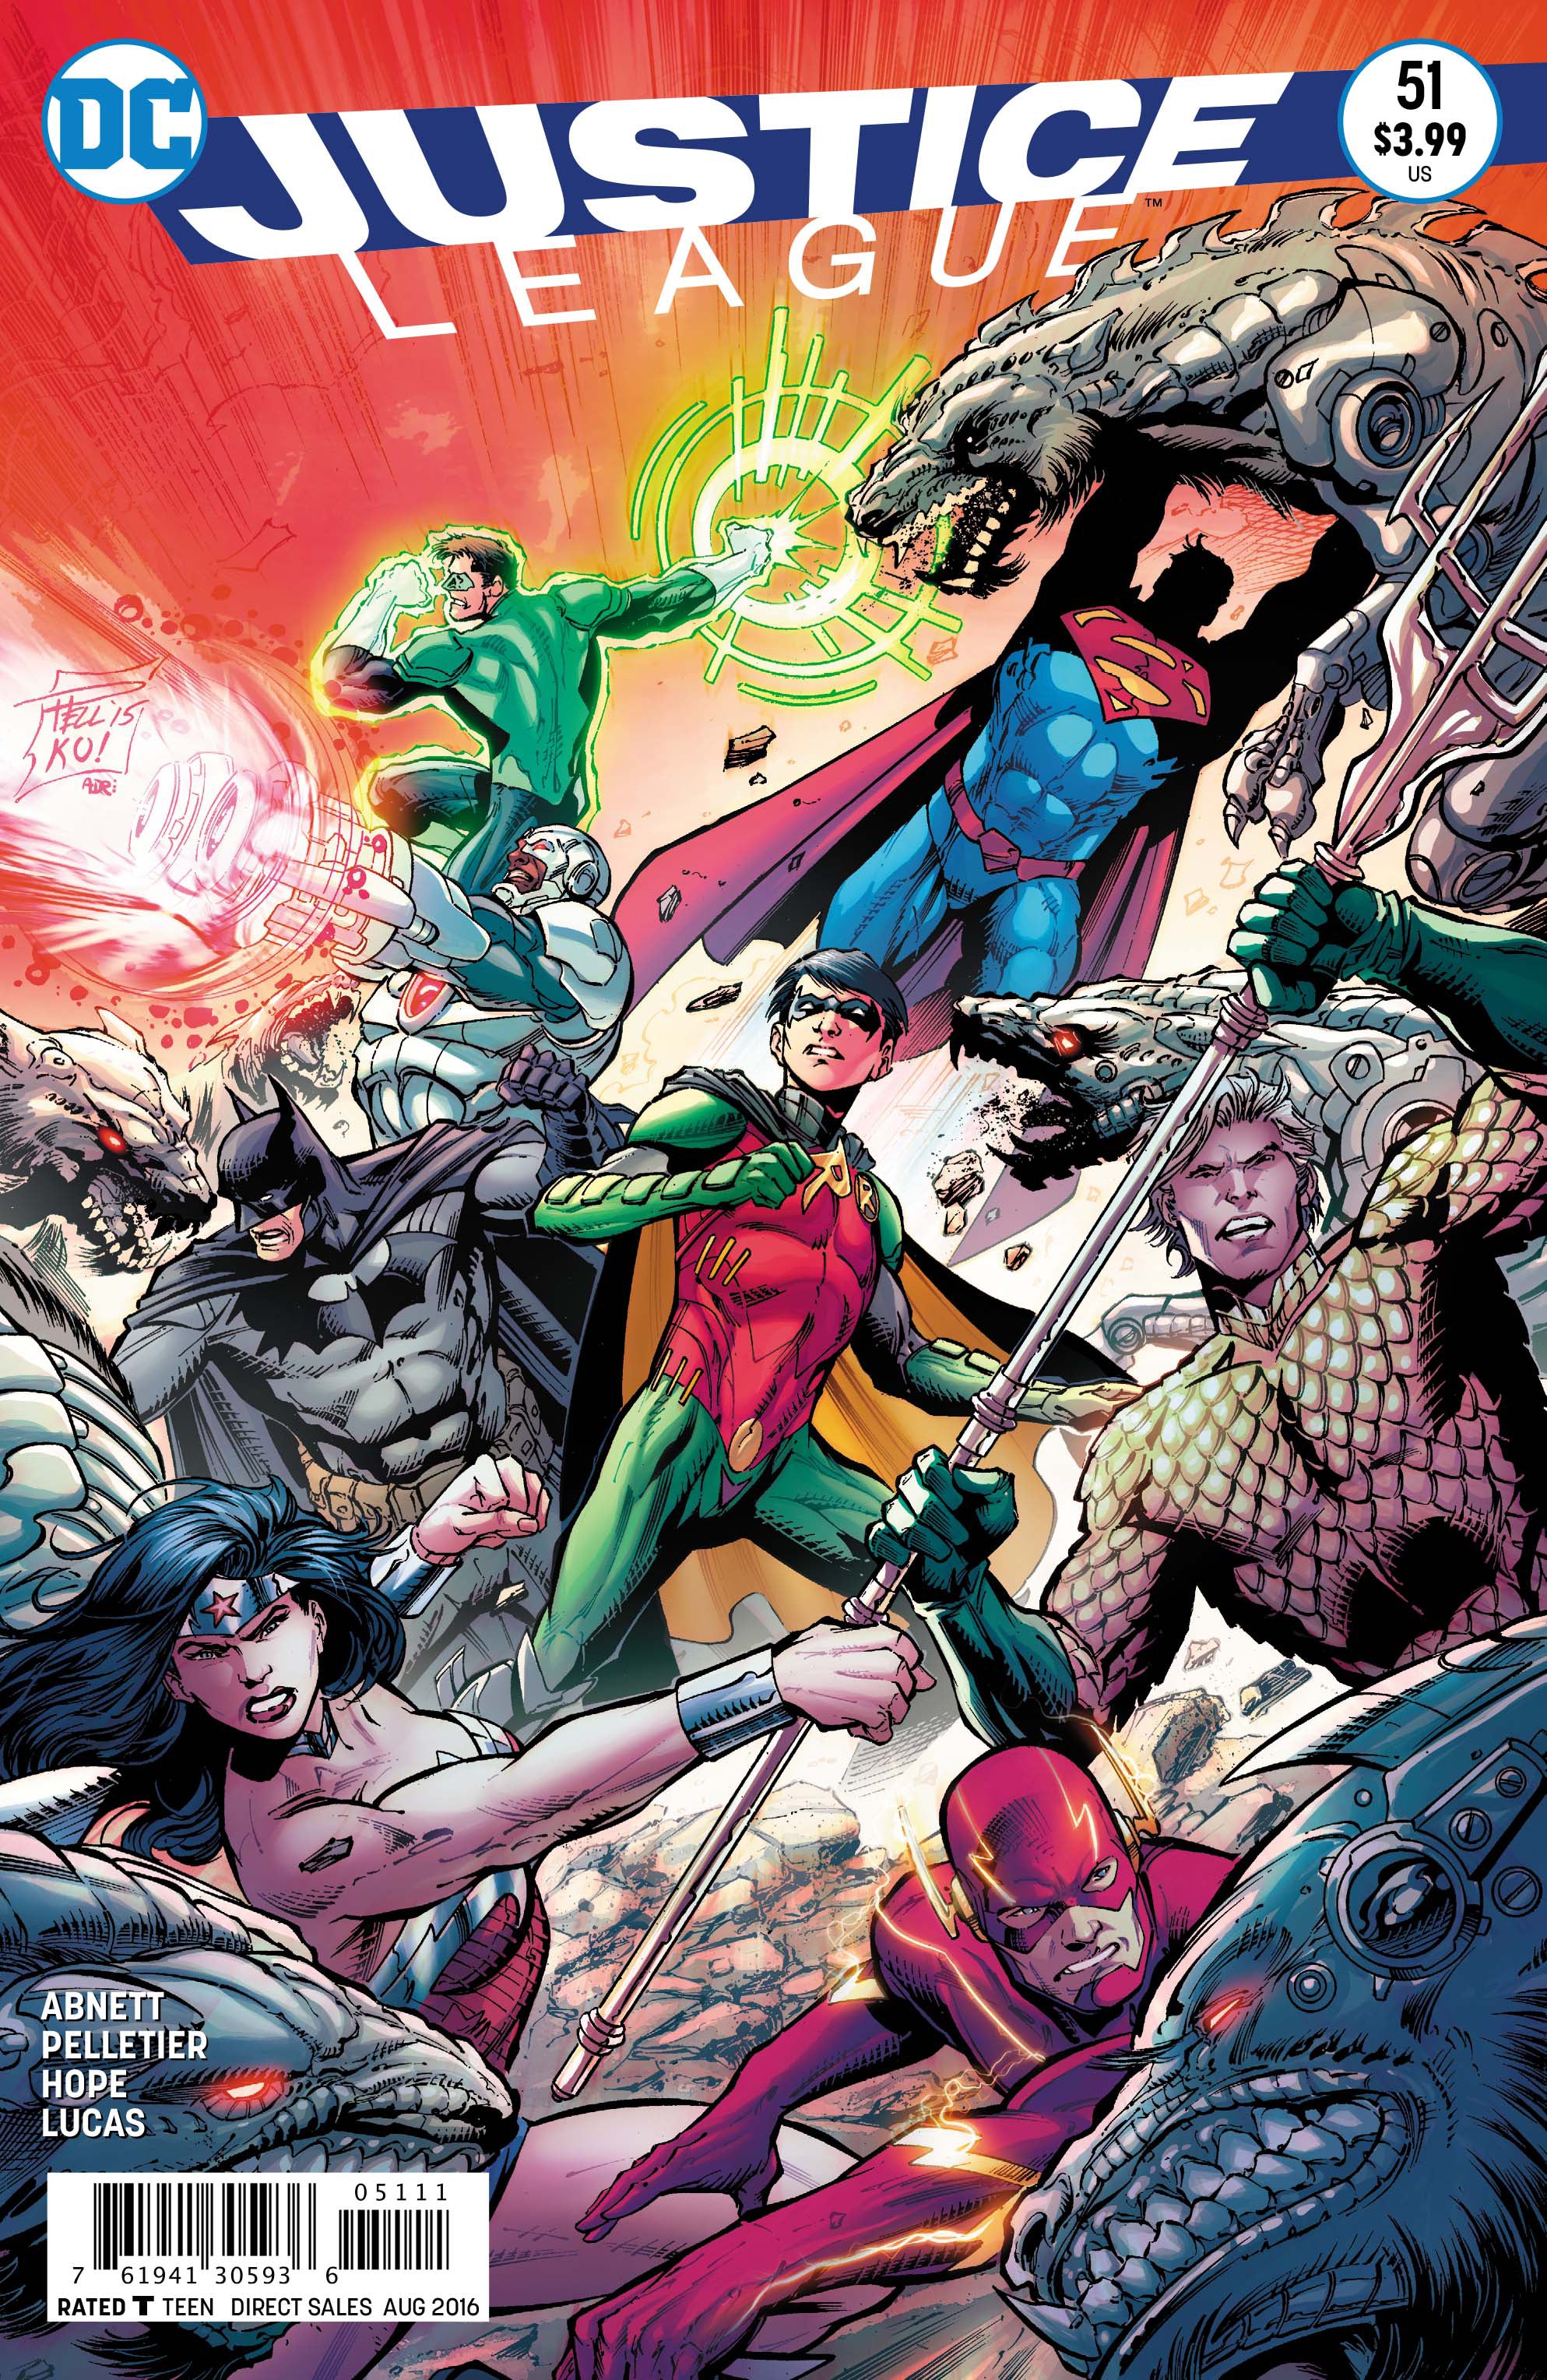 JUSTICE LEAGUE #51 | Game Master's Emporium (The New GME)